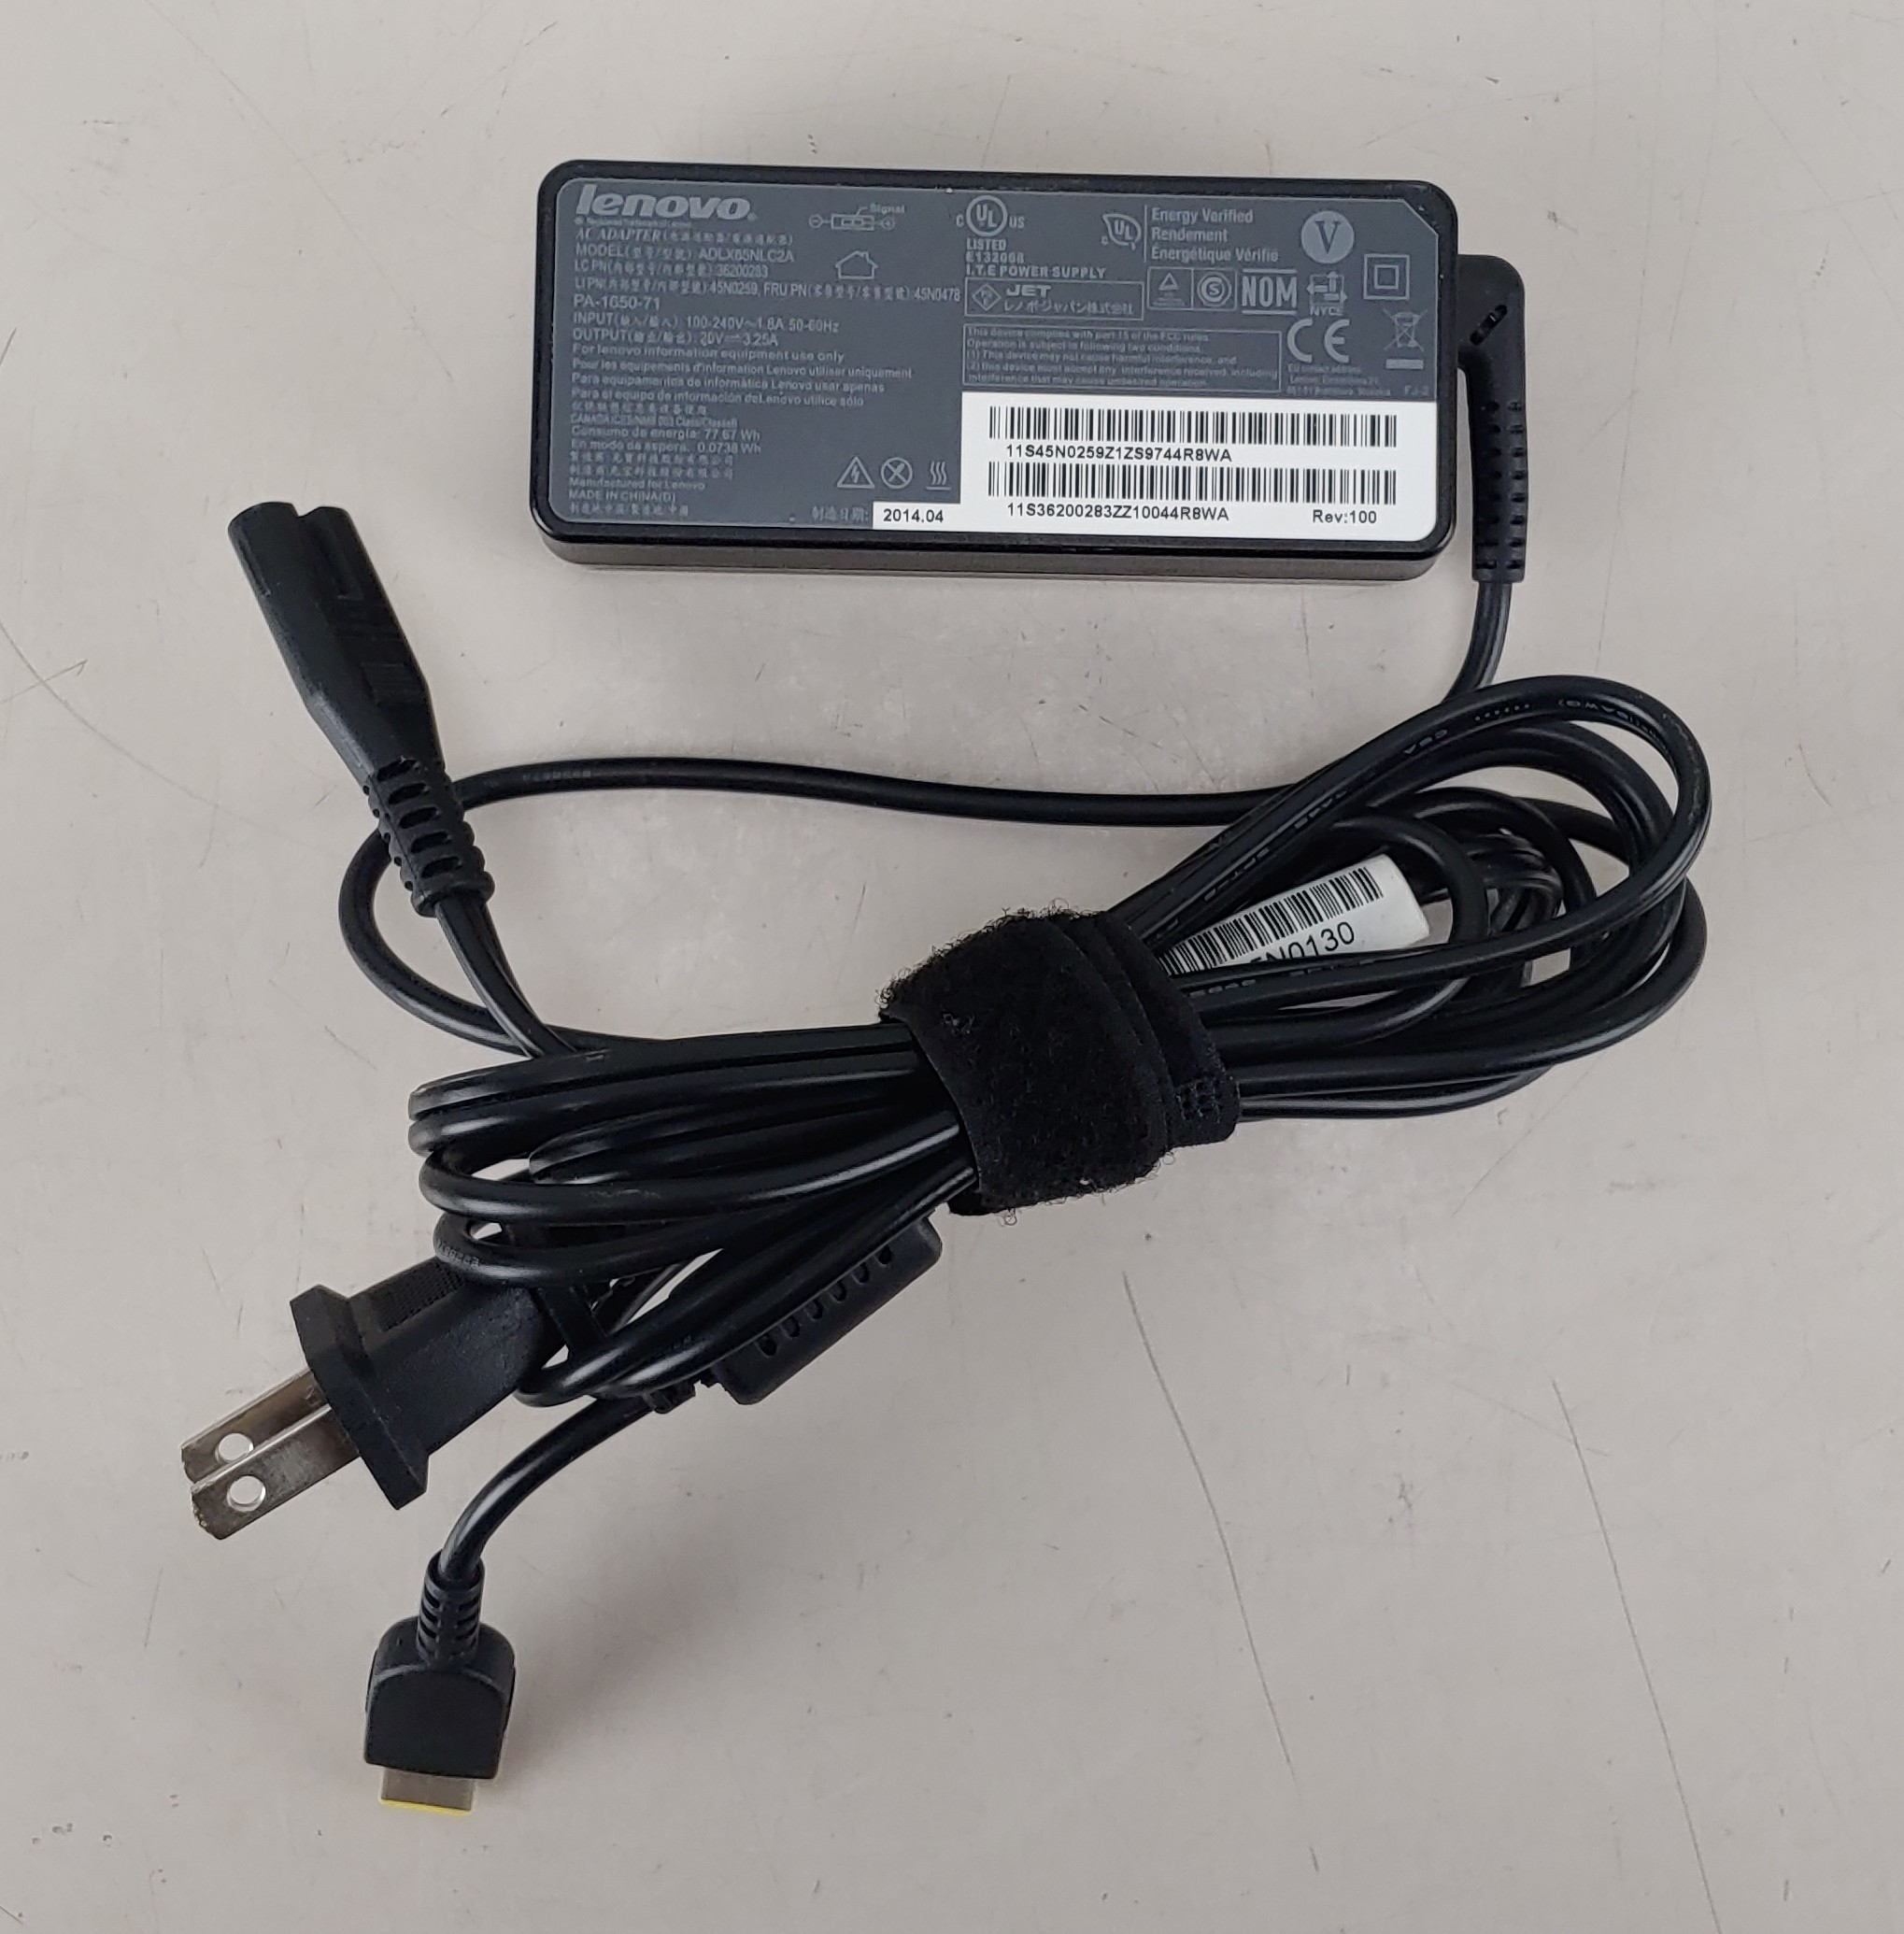 Lenovo PA-1650-71 ADLX65NKC2A Laptop Power Adapter Charger